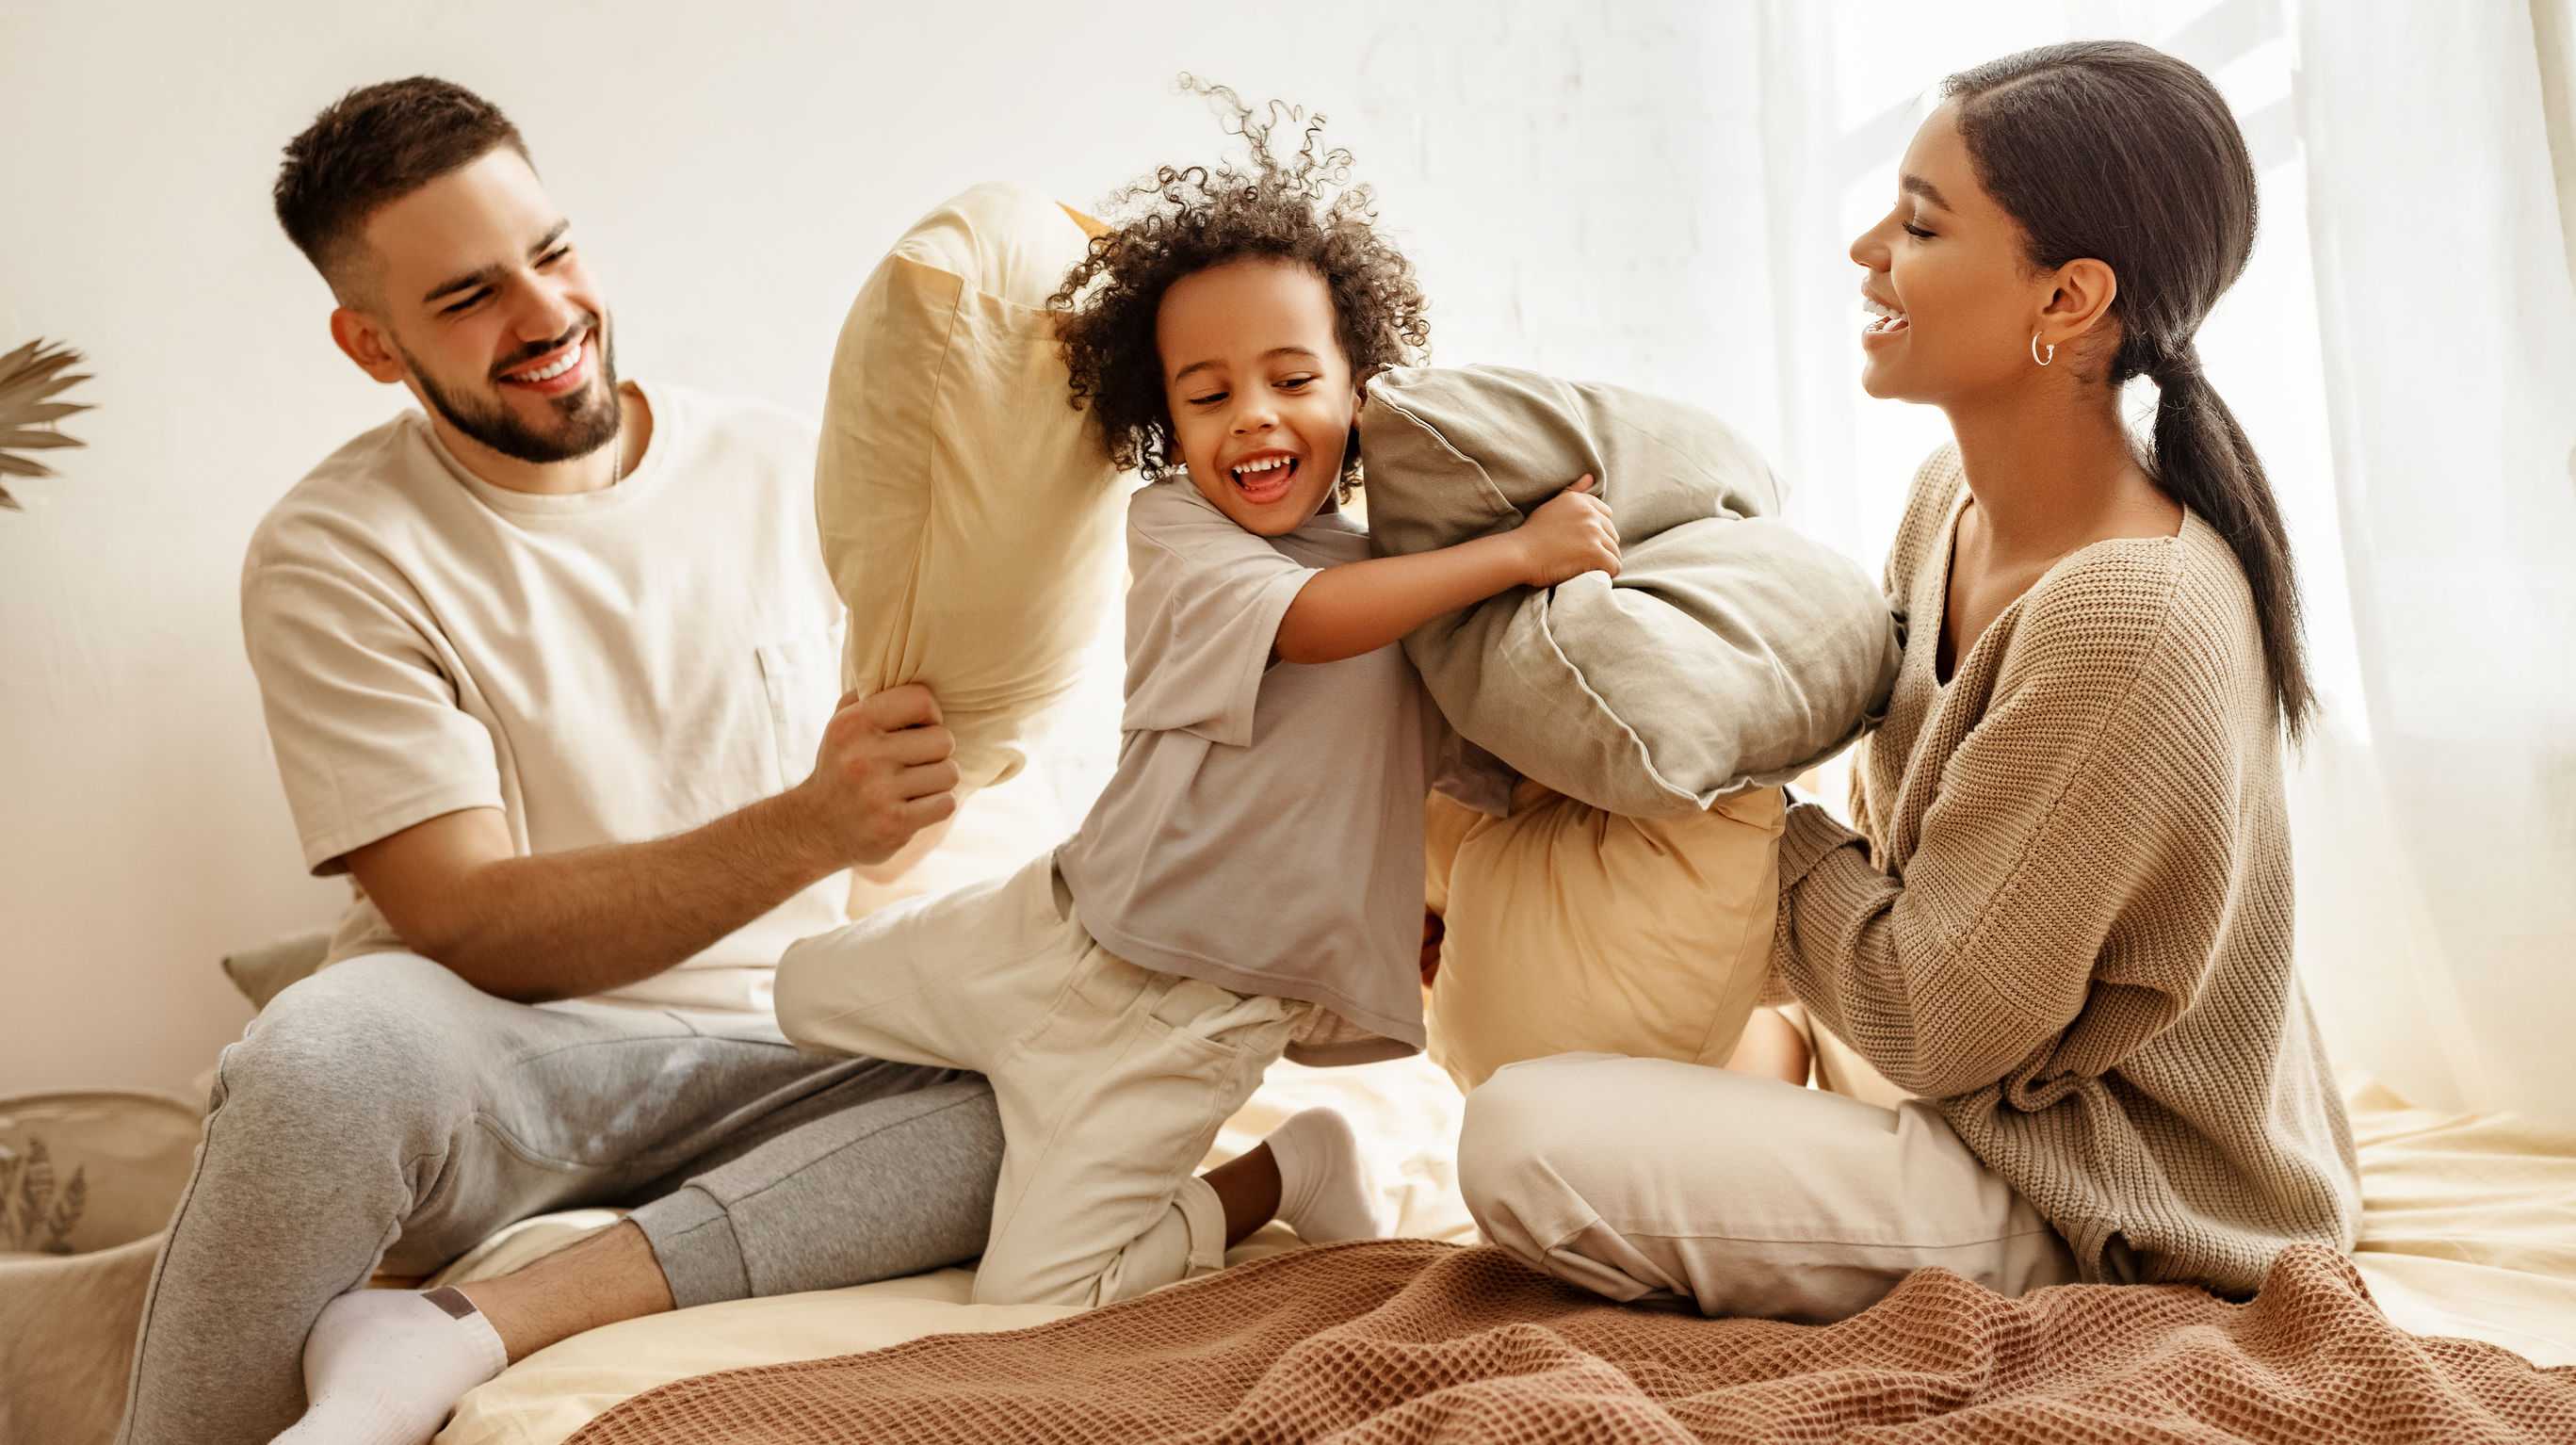 Family laughing during pillow fight